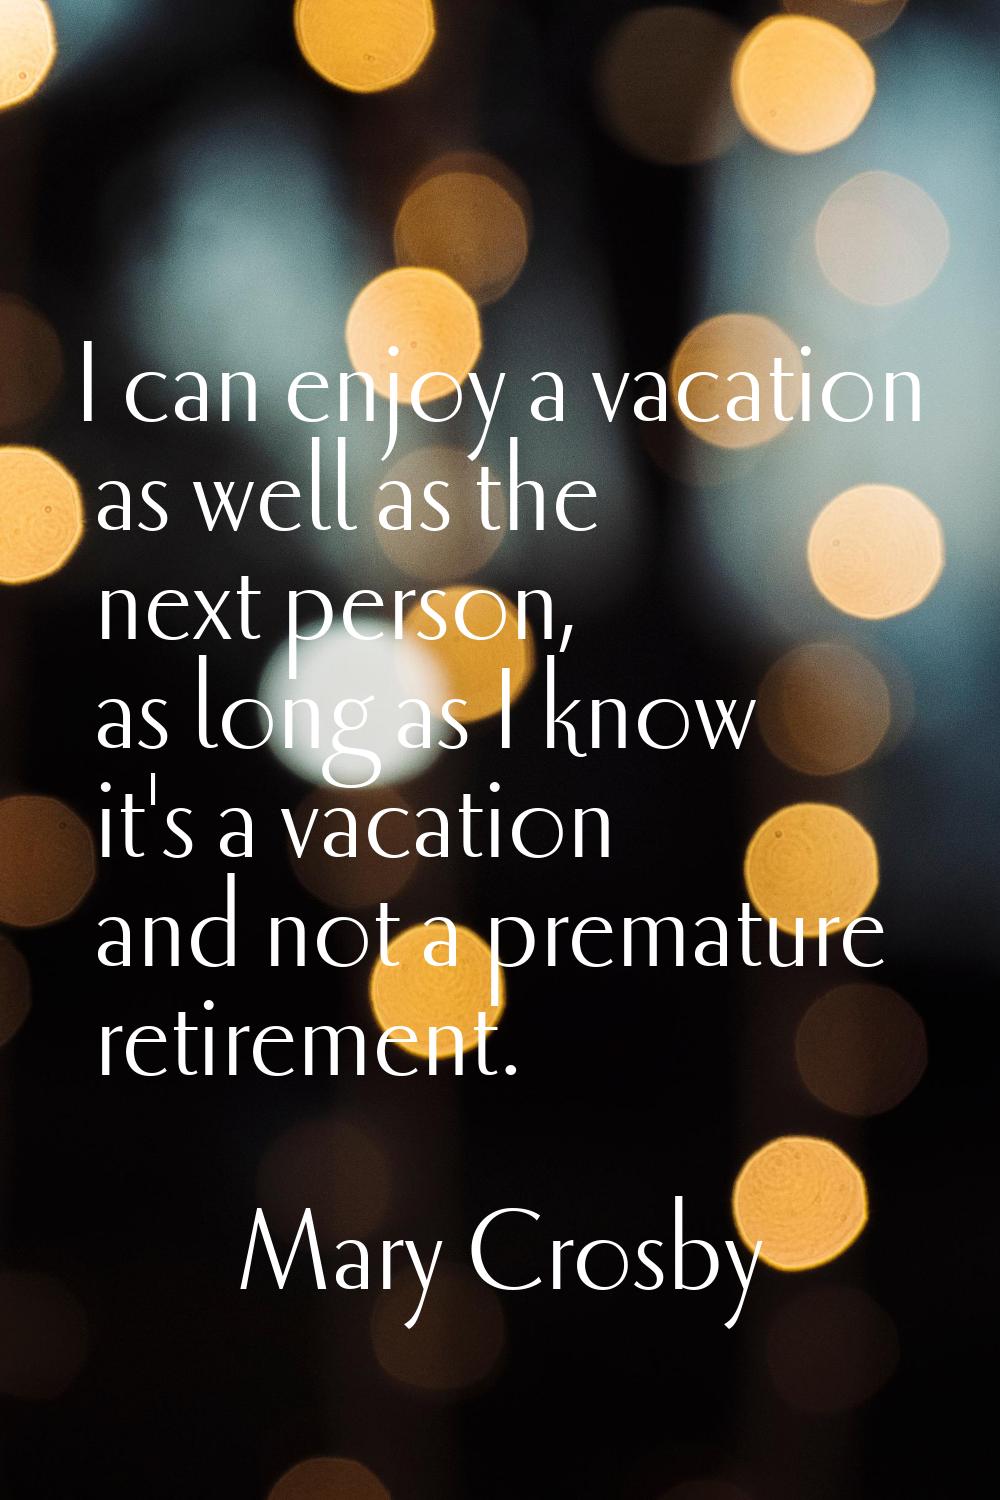 I can enjoy a vacation as well as the next person, as long as I know it's a vacation and not a prem